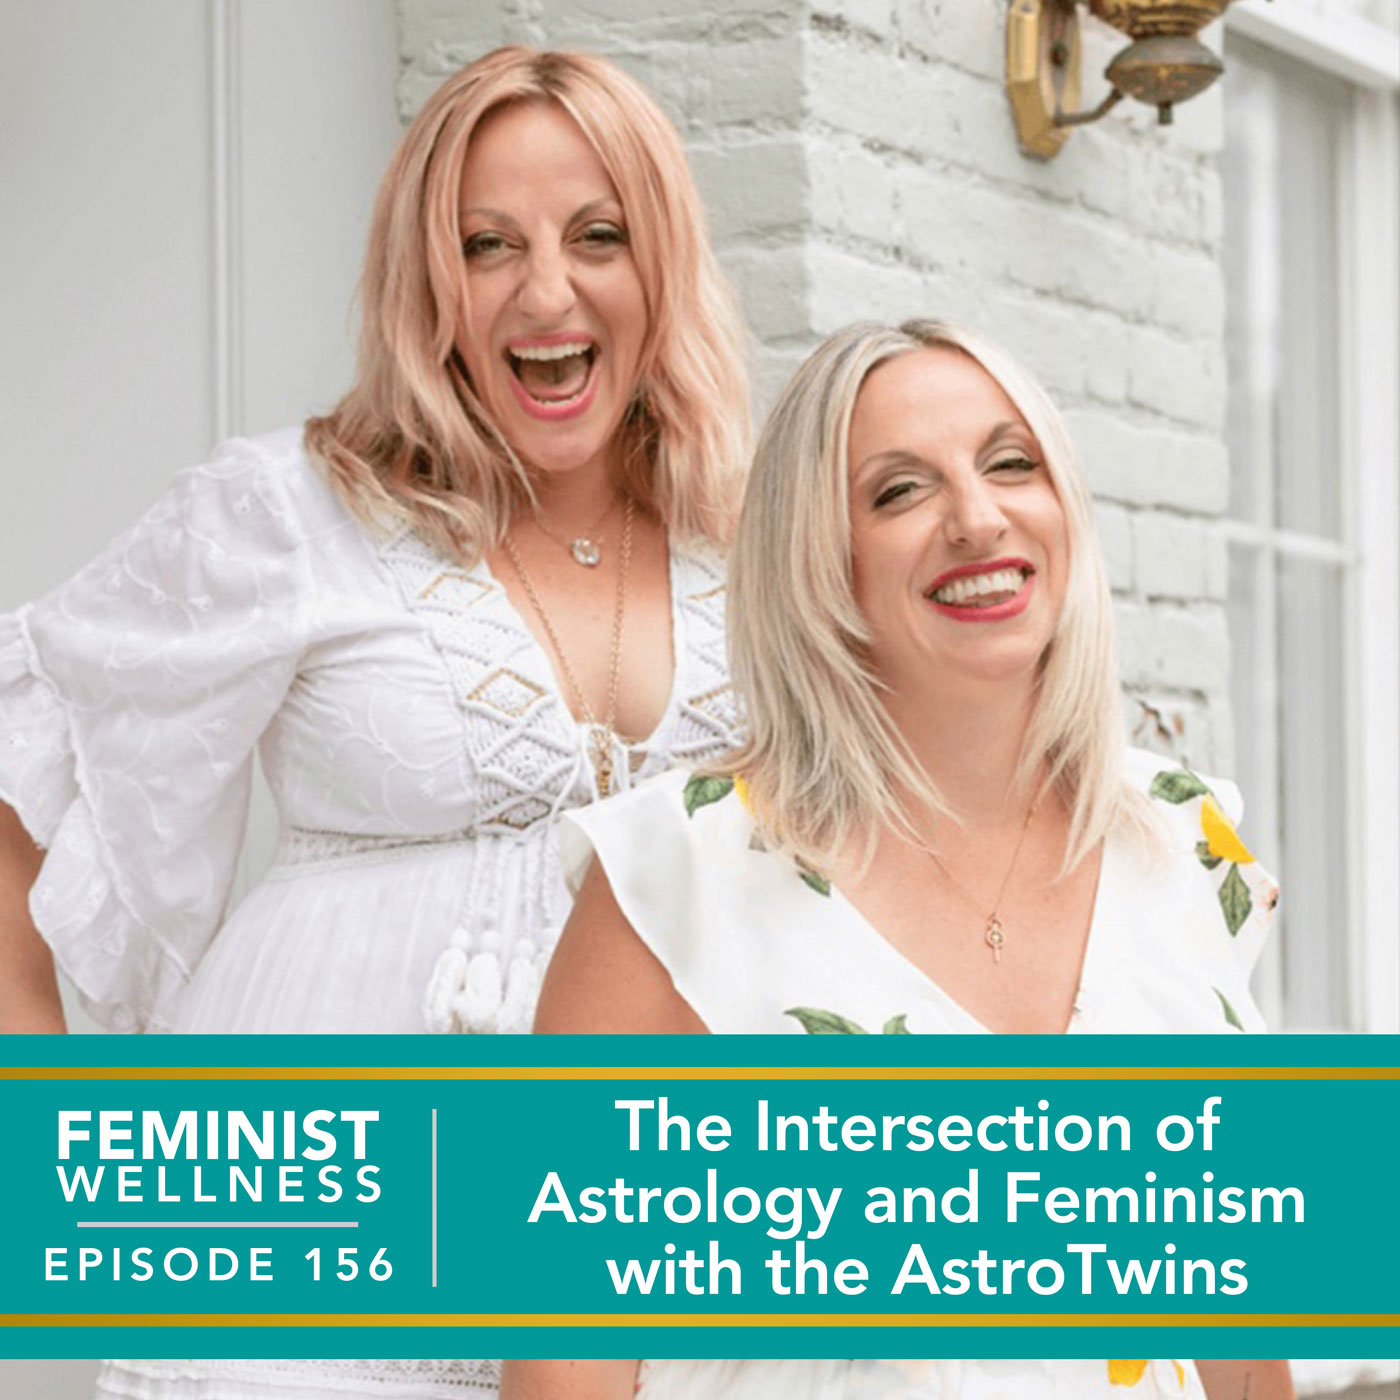 Feminist Wellness with Victoria Albina | The Intersection of Astrology and Feminism with the AstroTwins